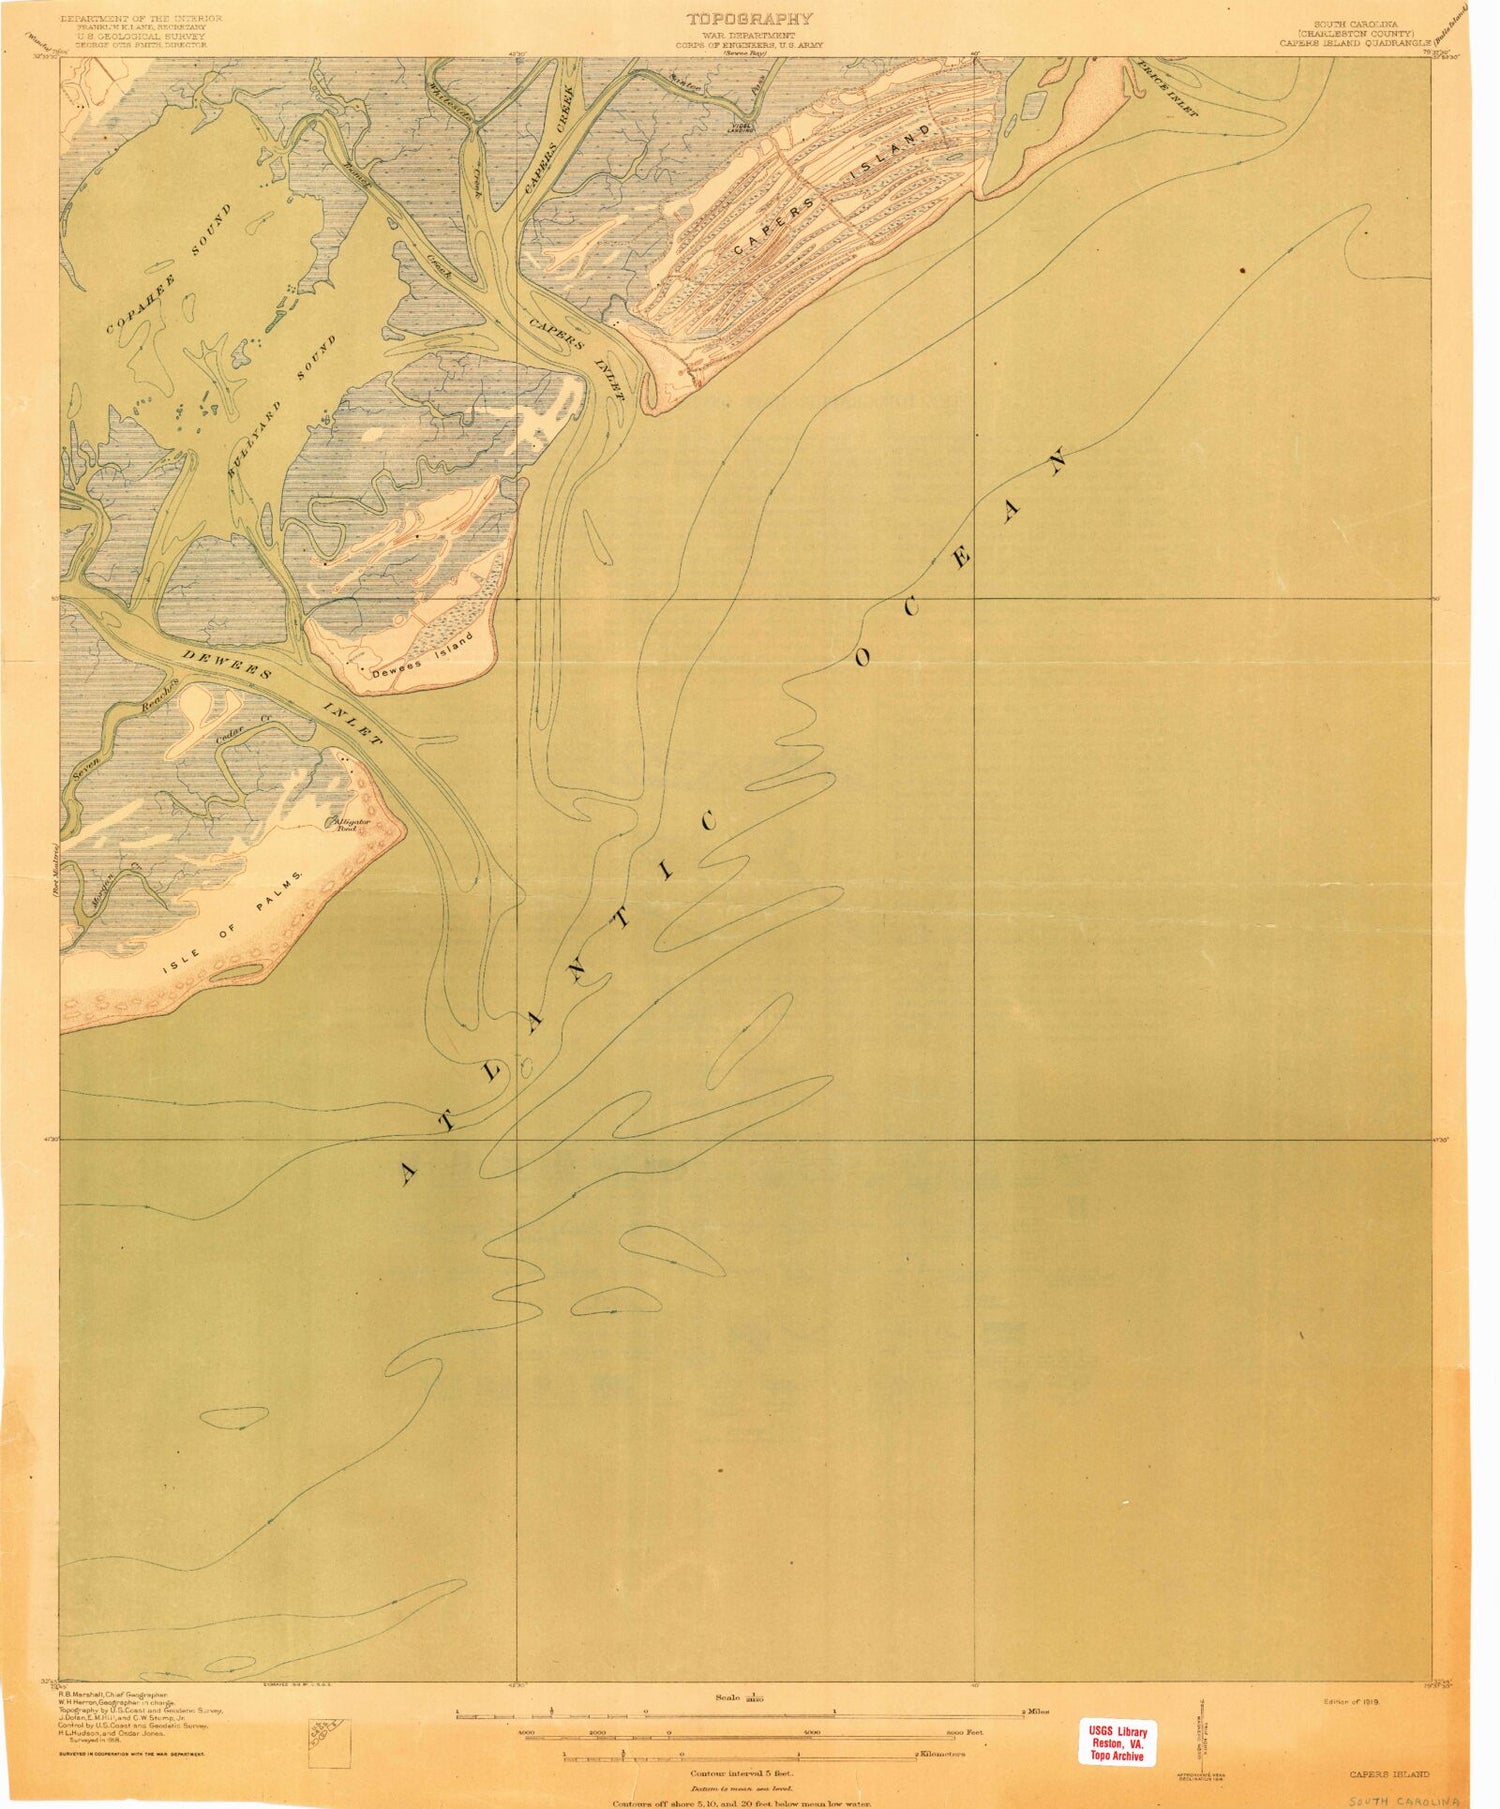 Classic USGS Capers Inlet South Carolina 7.5'x7.5' Topo Map Image